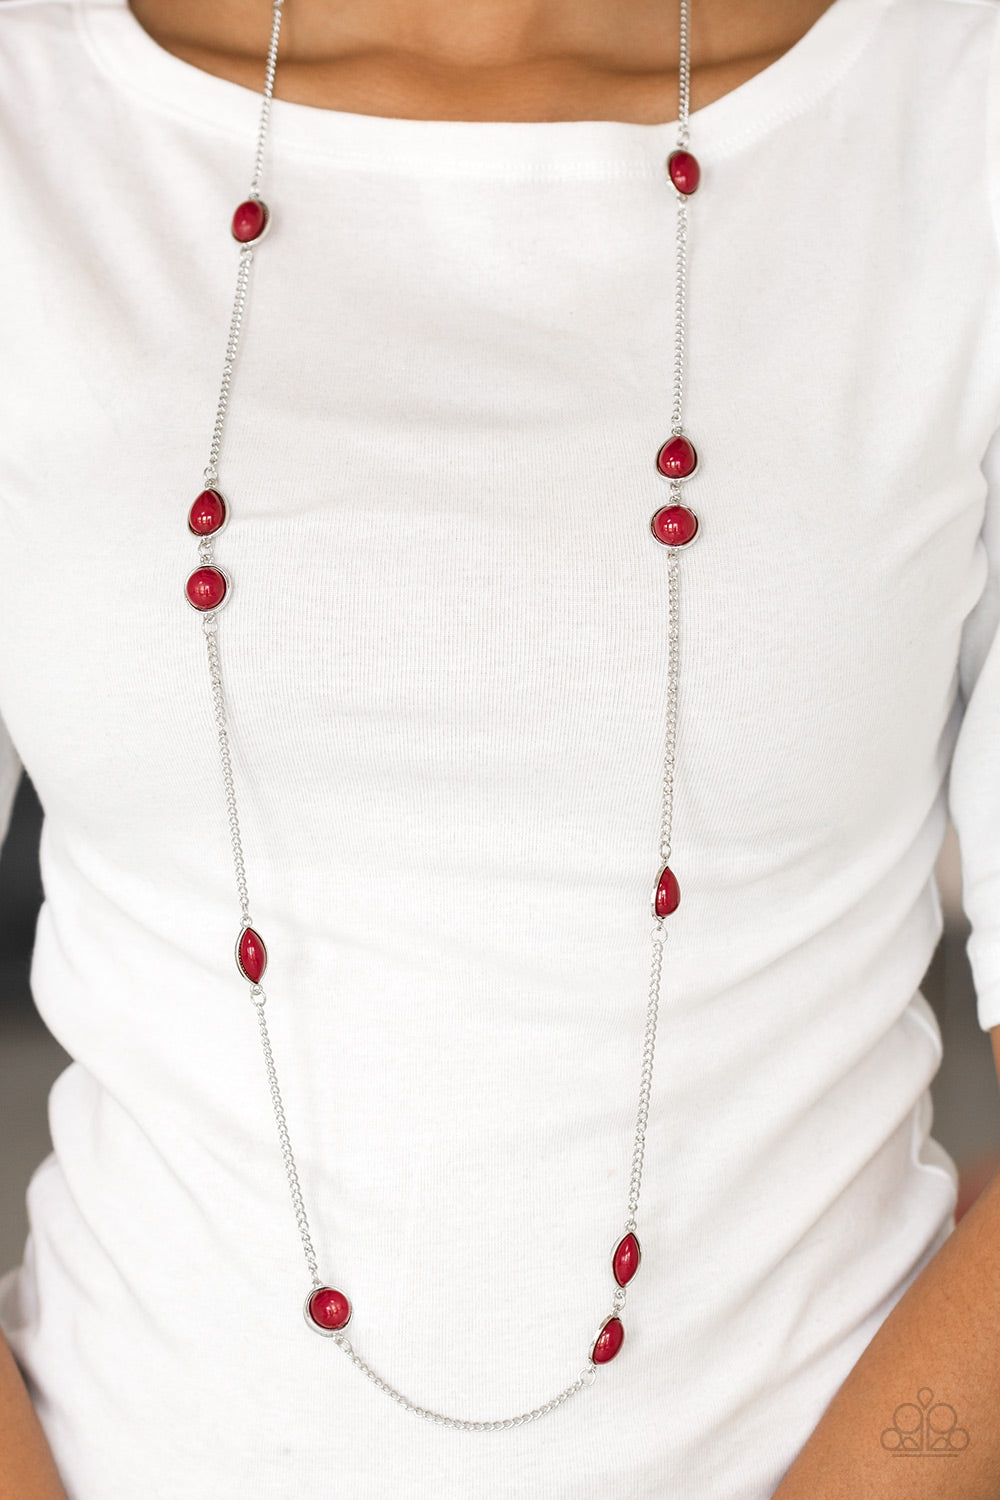 Pacific Piers - Red and Silver Fashion Necklace - Paparazzi Accessories - Featuring round and teardrop shapes, rich red beading trickles along an elongated silver chain for a seasonal look. Features an adjustable clasp closure. Sold as one individual necklace.